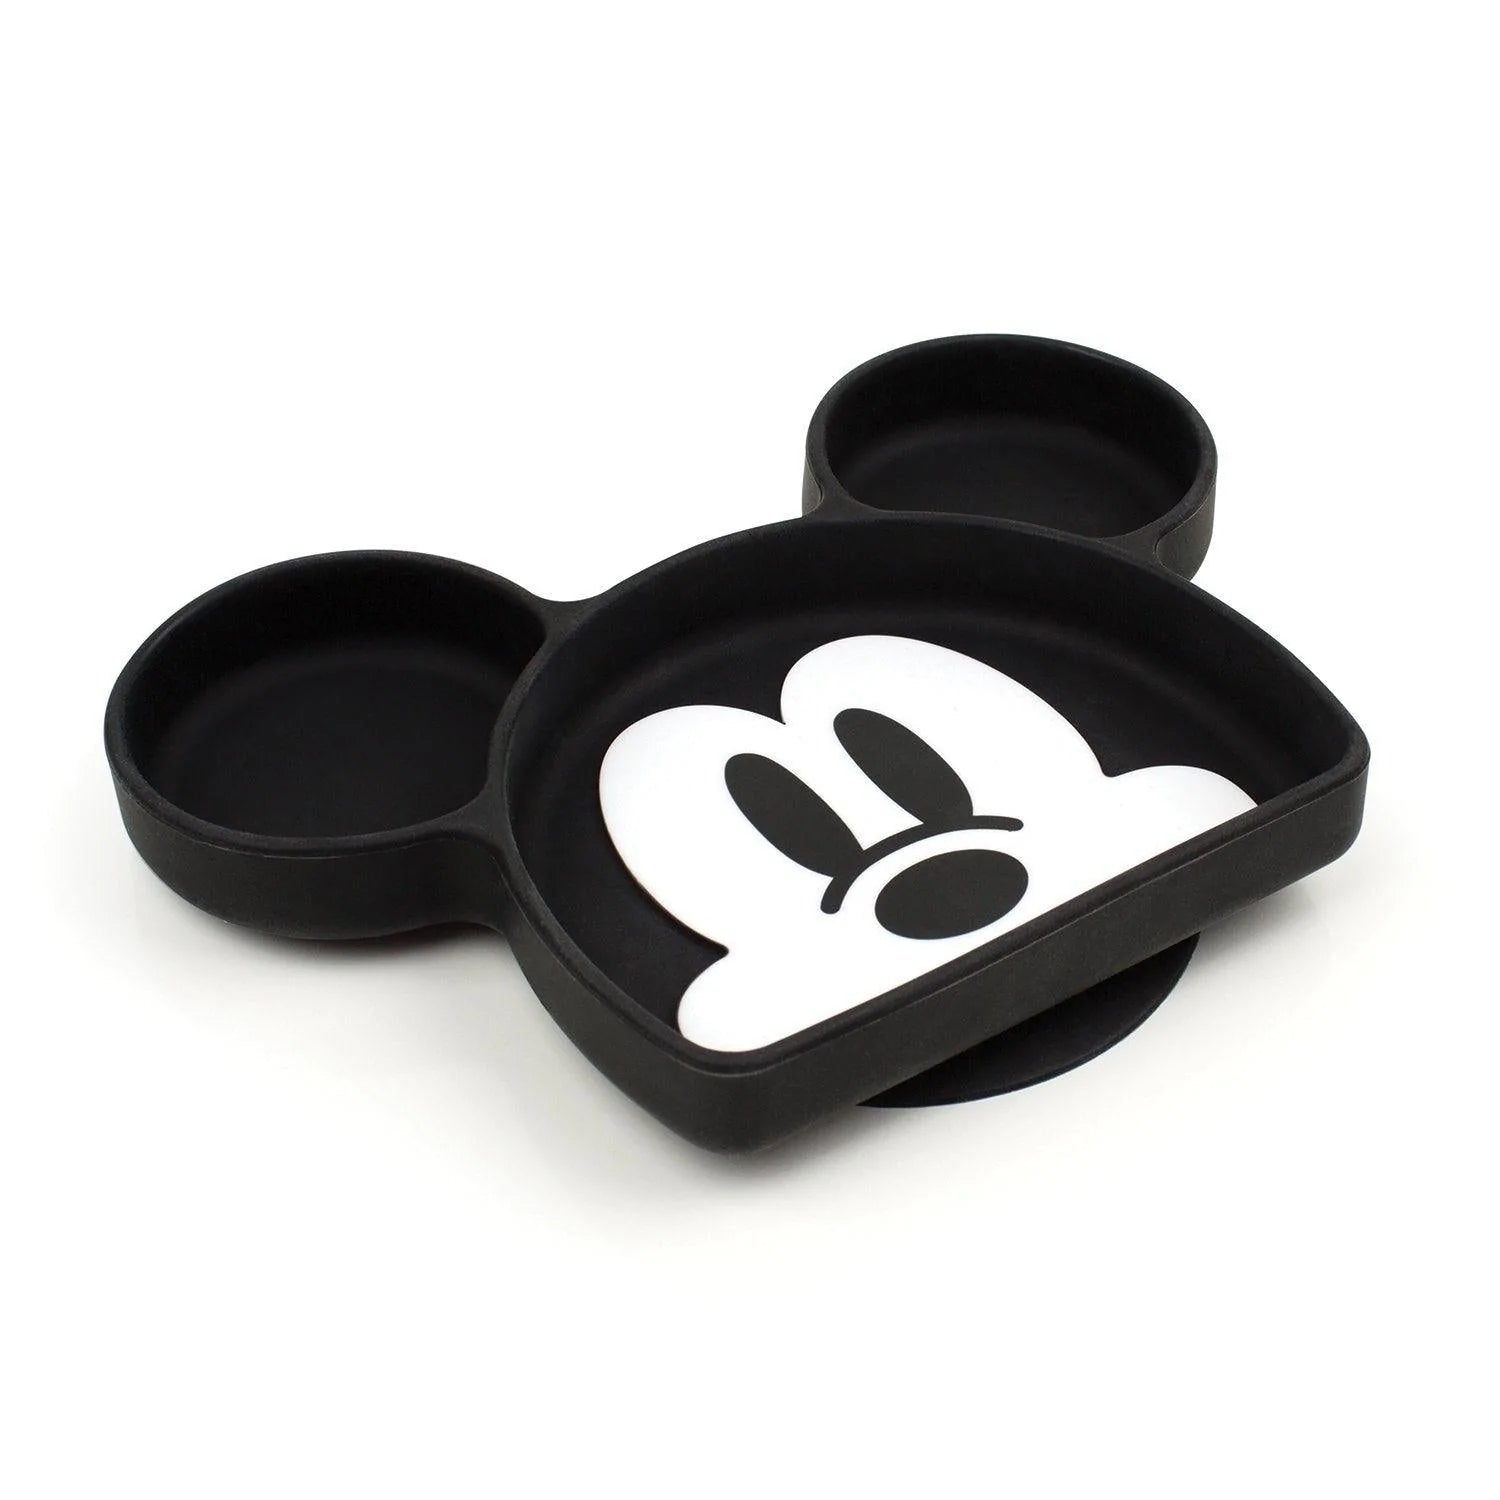 Bumkins Grip Dish, Silicone, Mickey Mouse